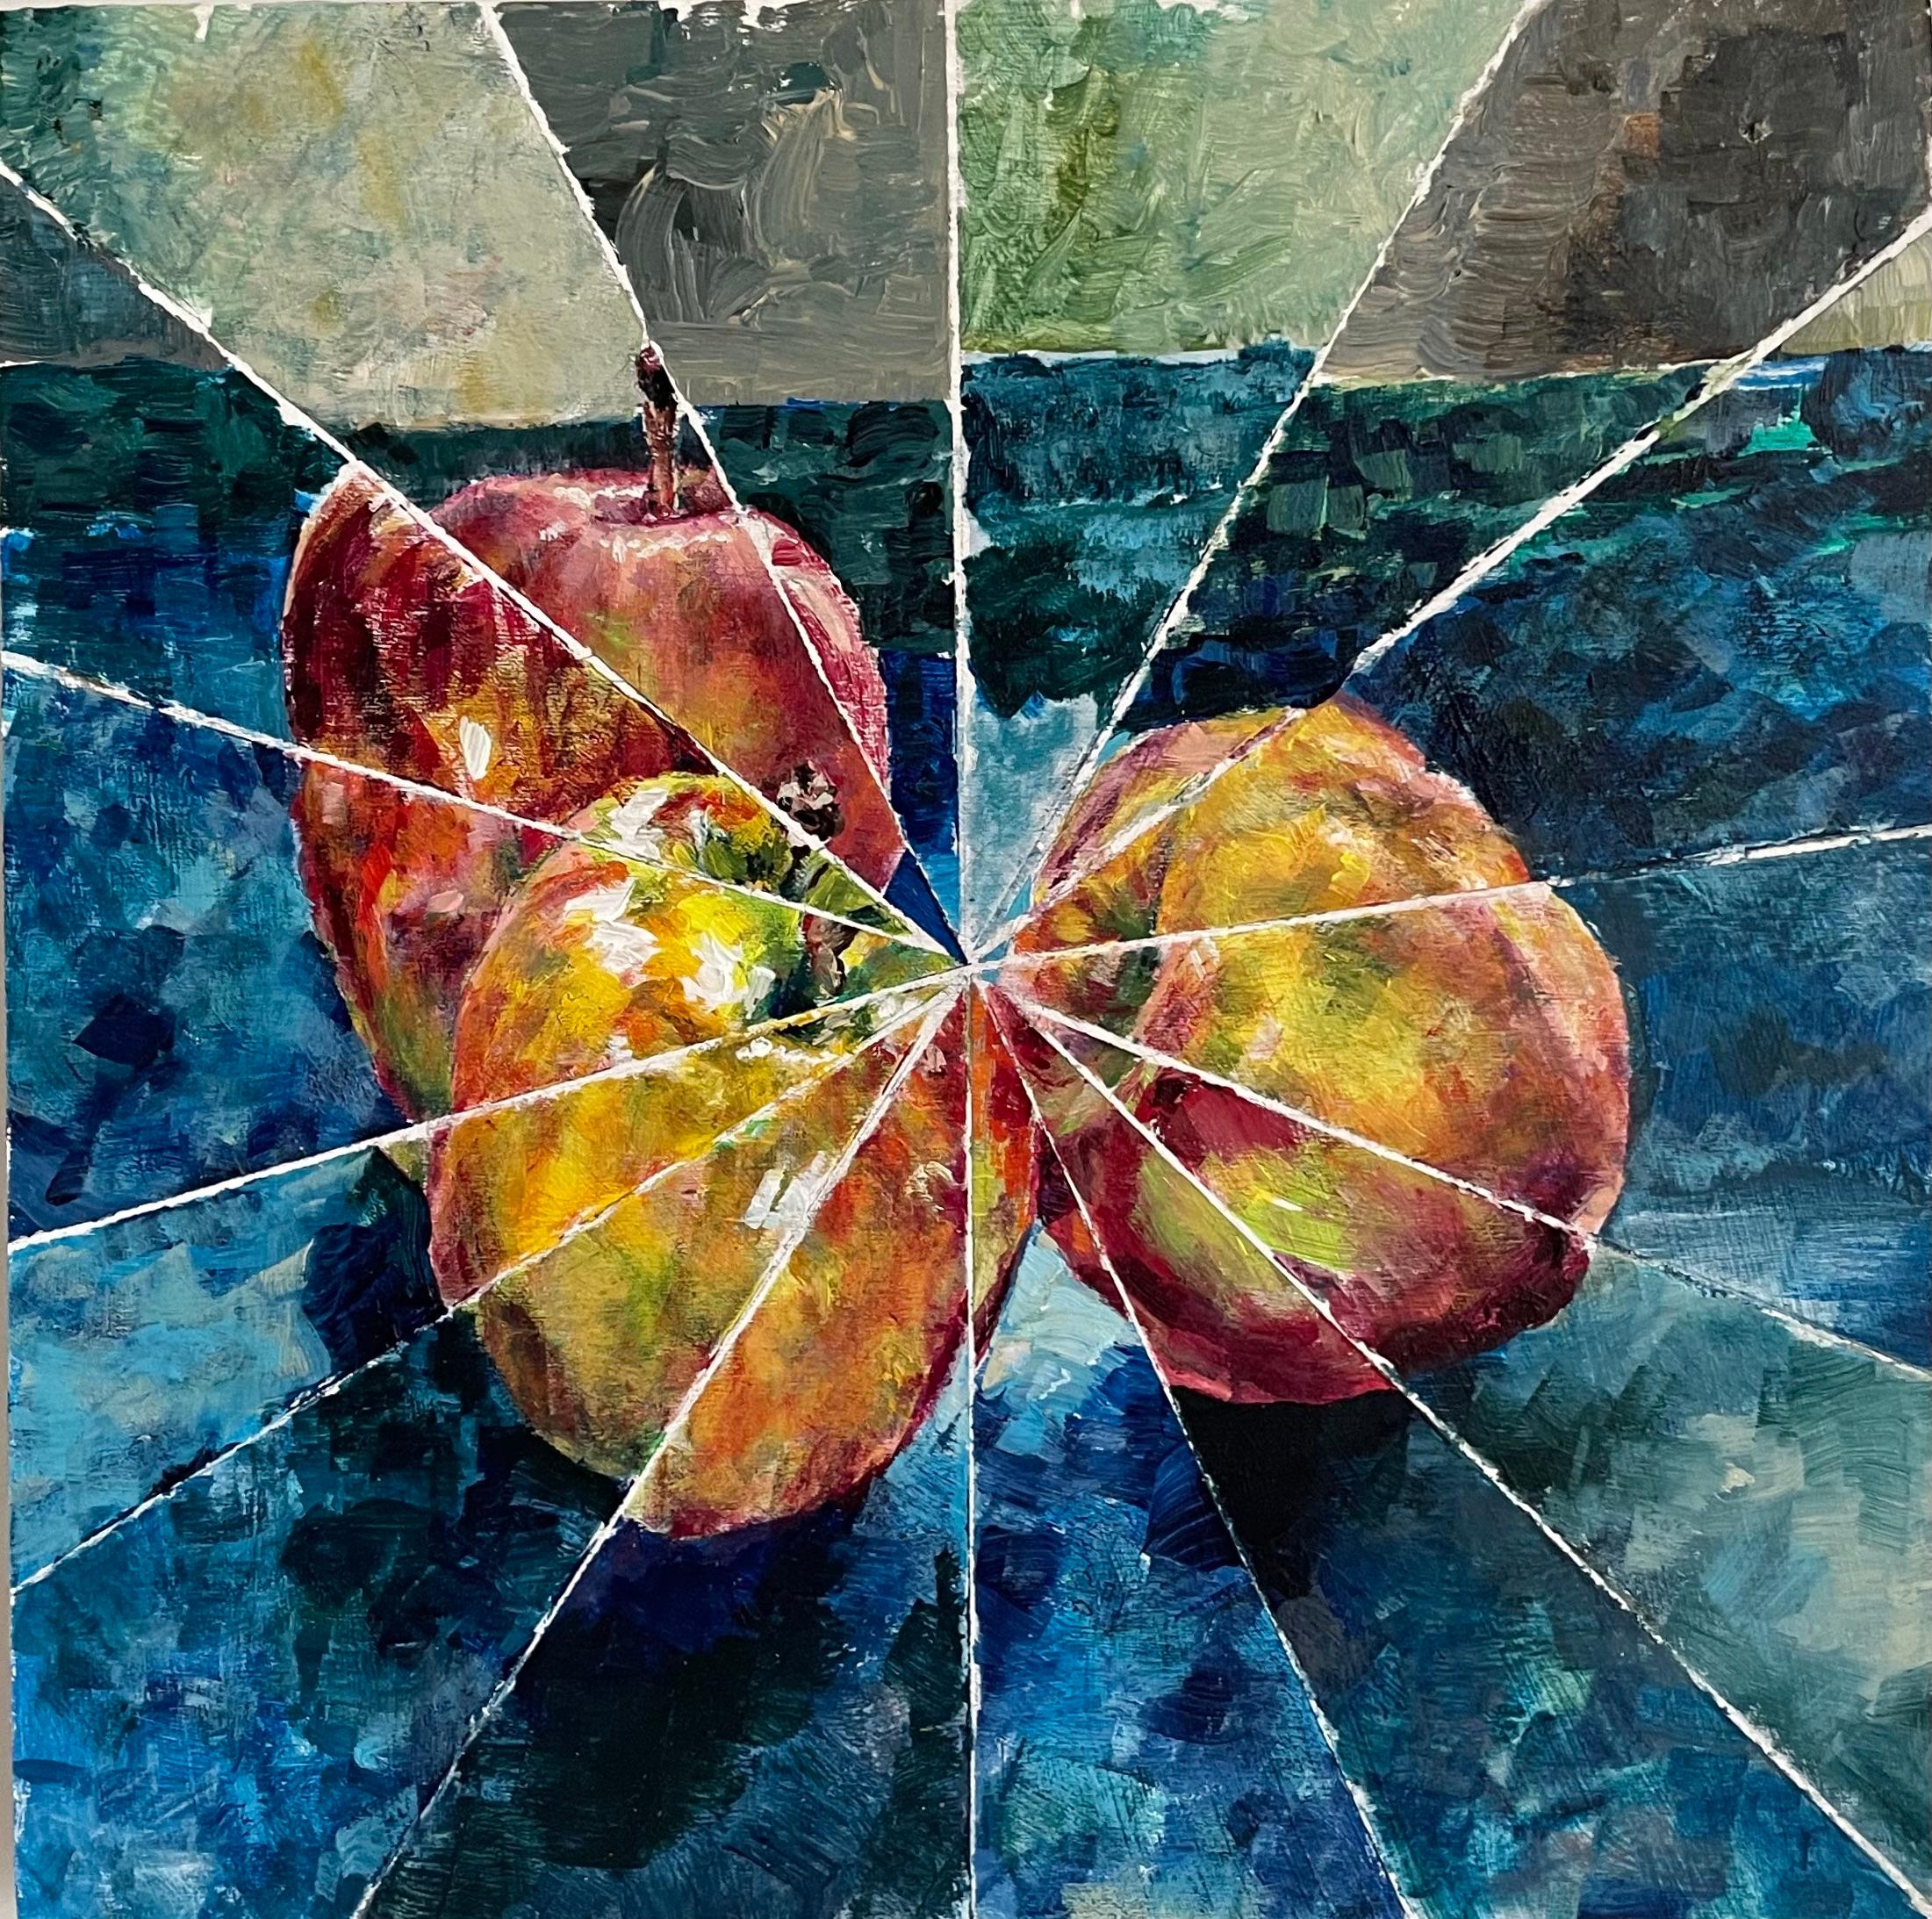 Mat Tomezsko Abstract Painting - Three Apples: abstract still life interior painting of red/green apples on blue